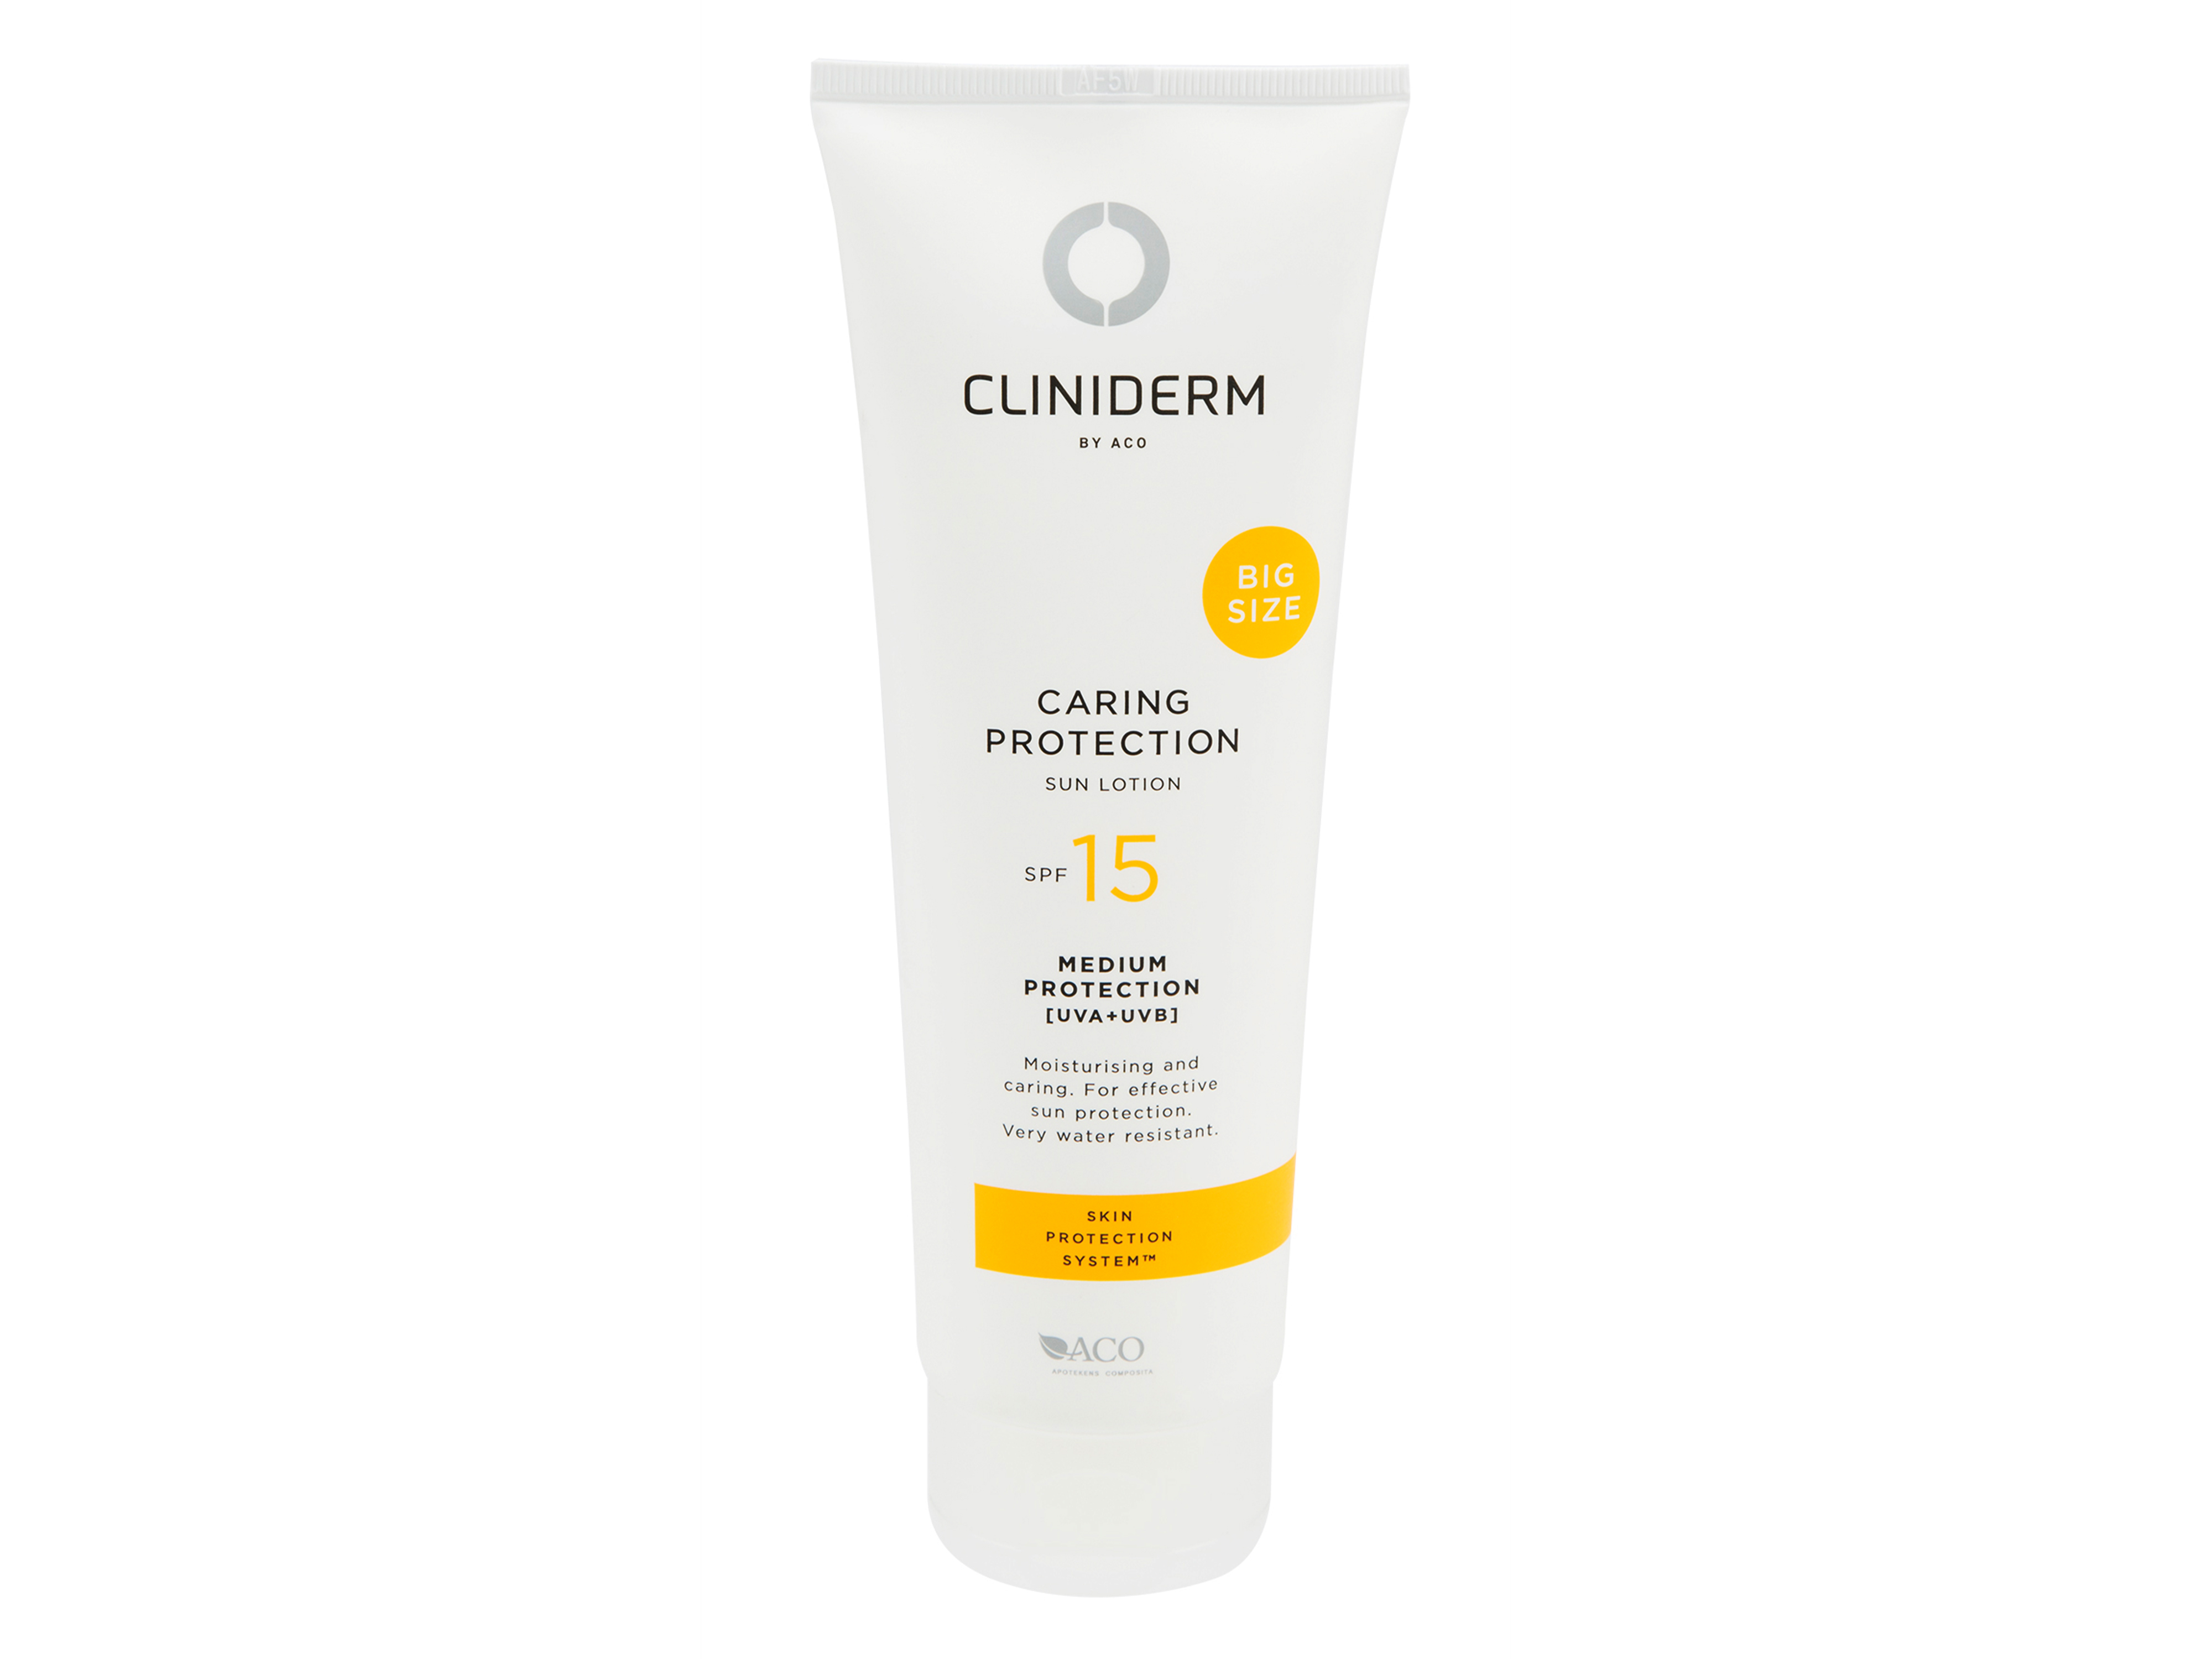 Cliniderm Caring Protection Sun Lotion big size, SPF 15, 250 ml